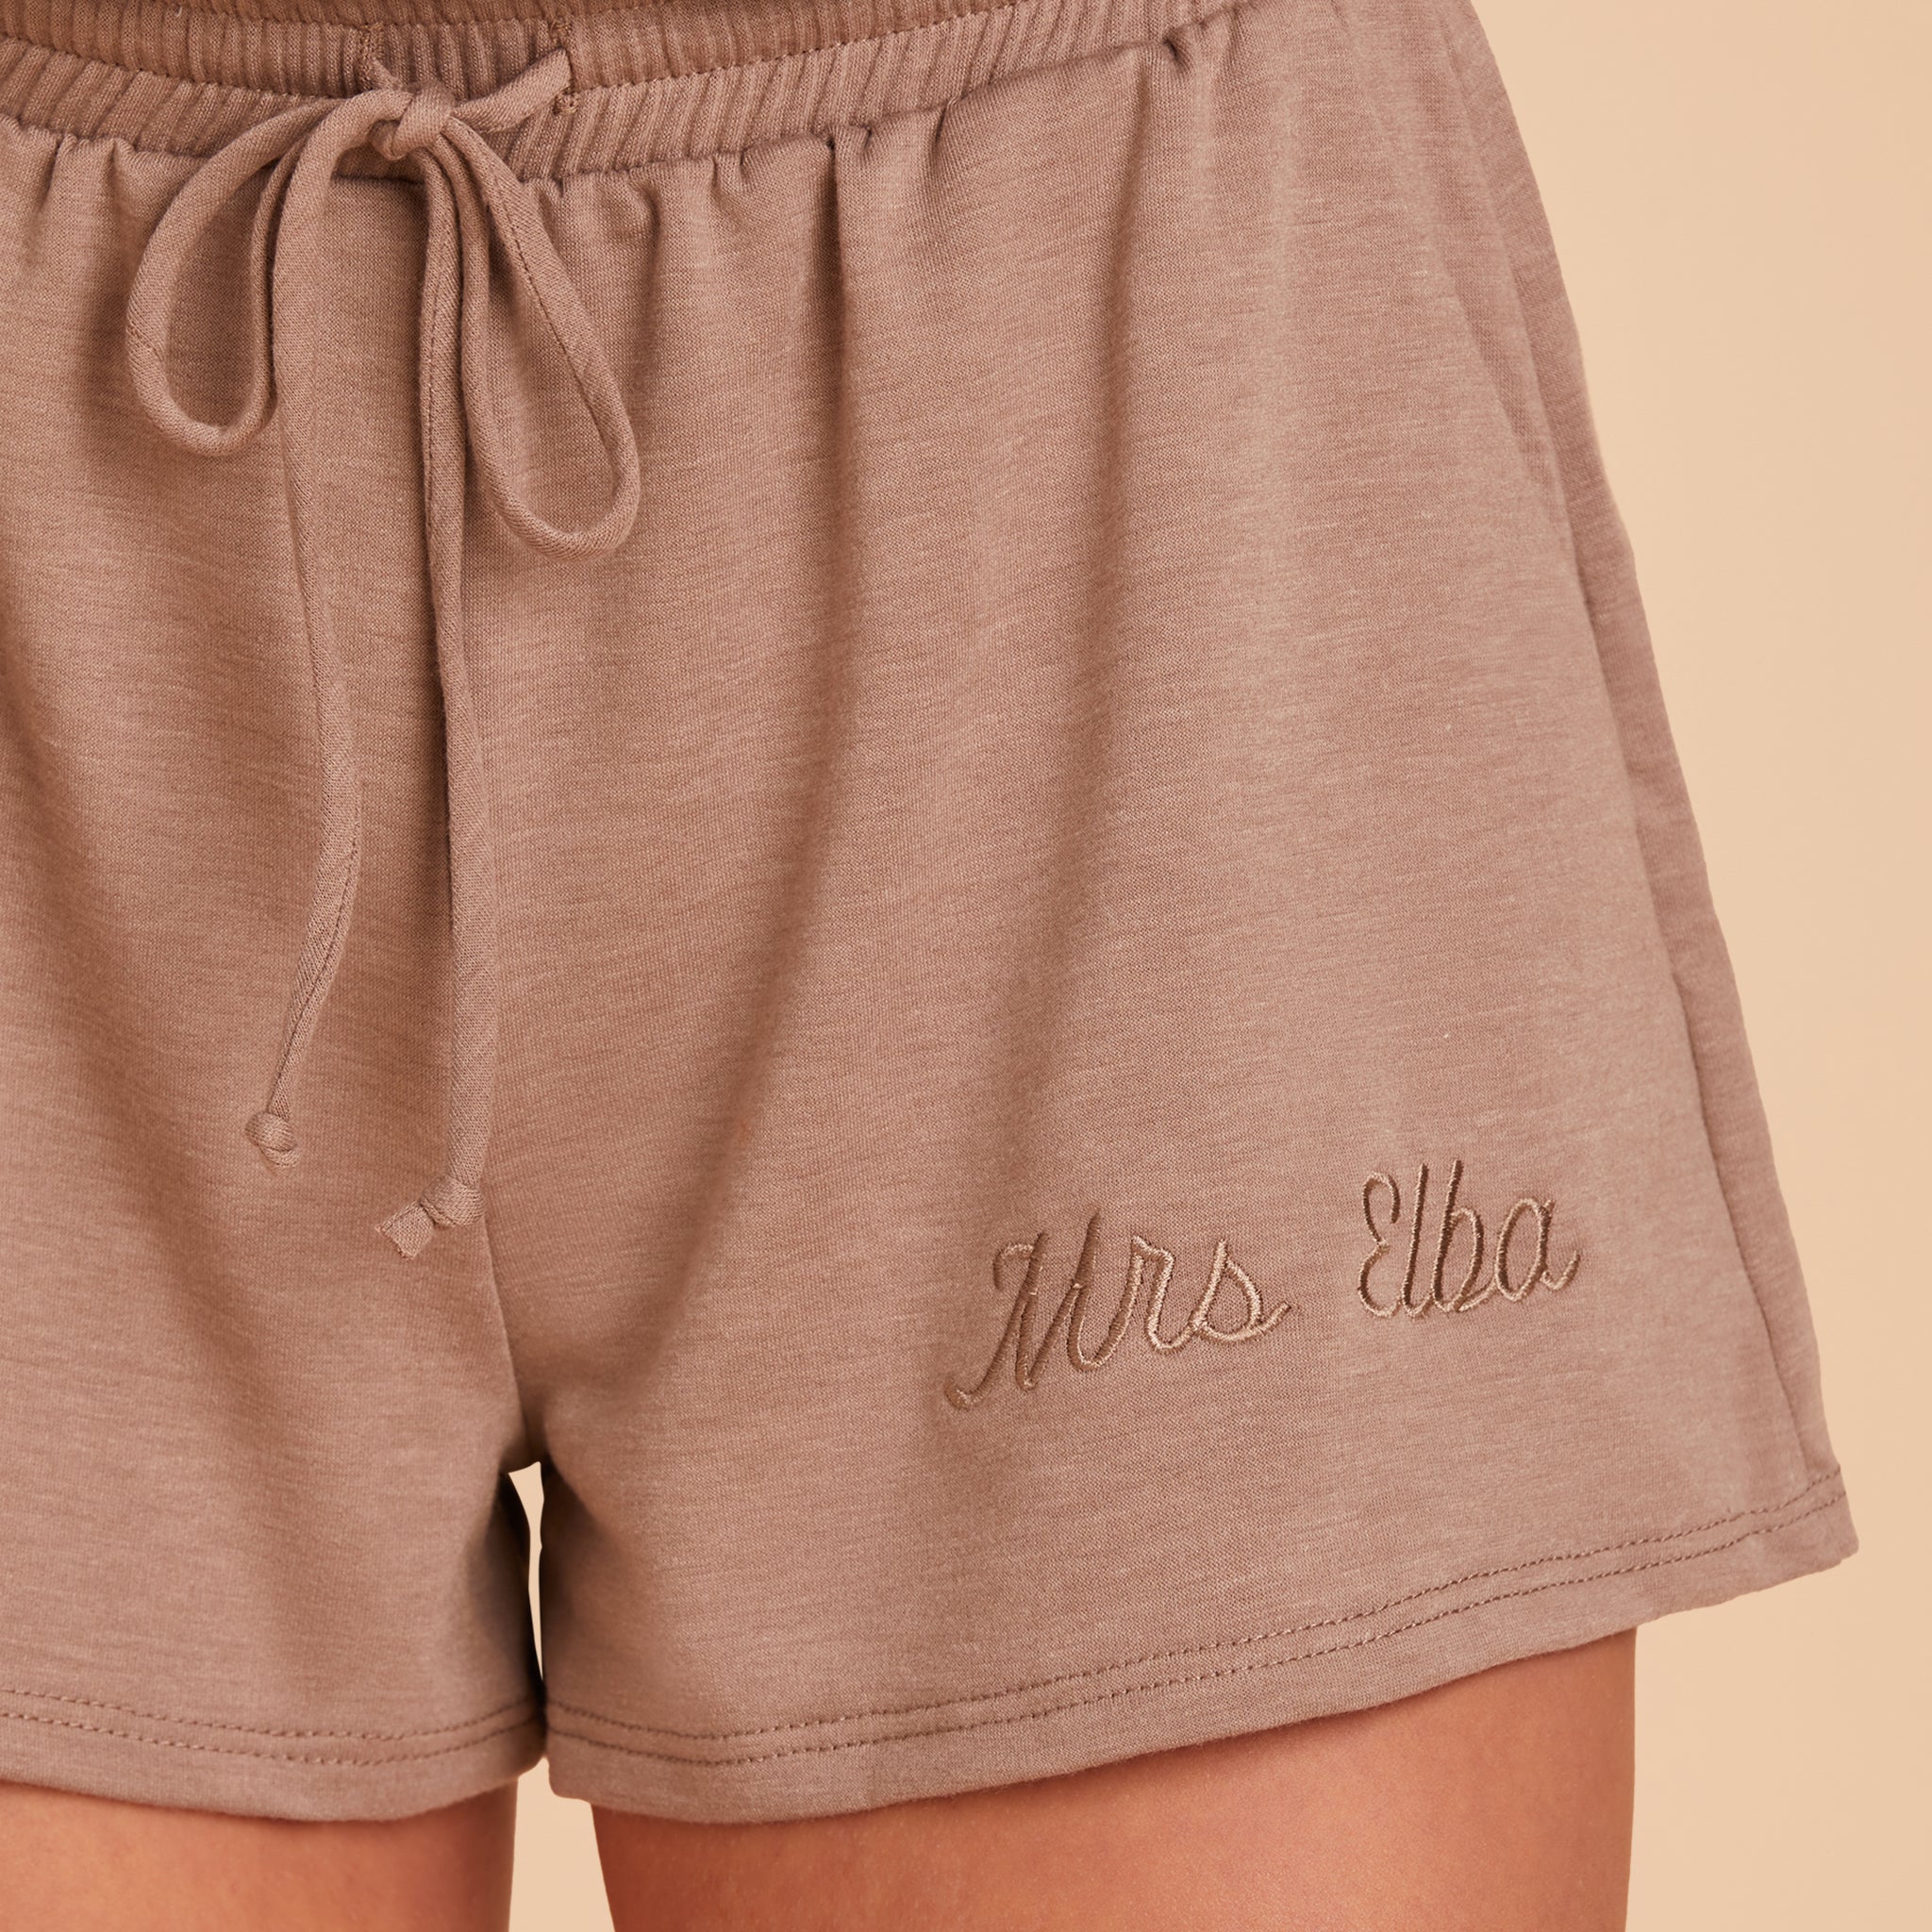 Monogram Shorts in Cocoa front view